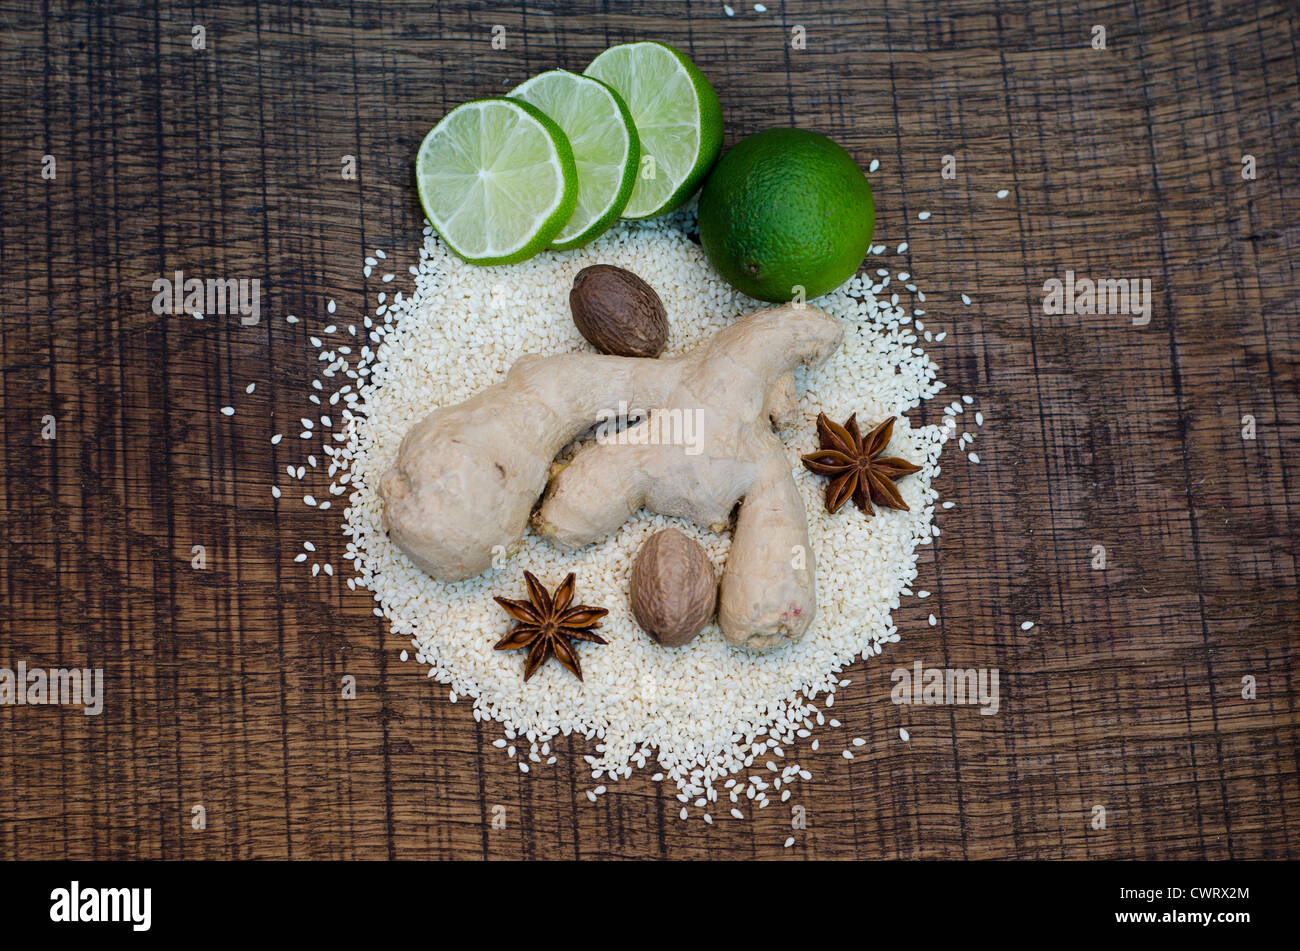 Looking down onto an arrangement of spices used in ayurveda healing and diet, on a dark oak wood surface. Stock Photo